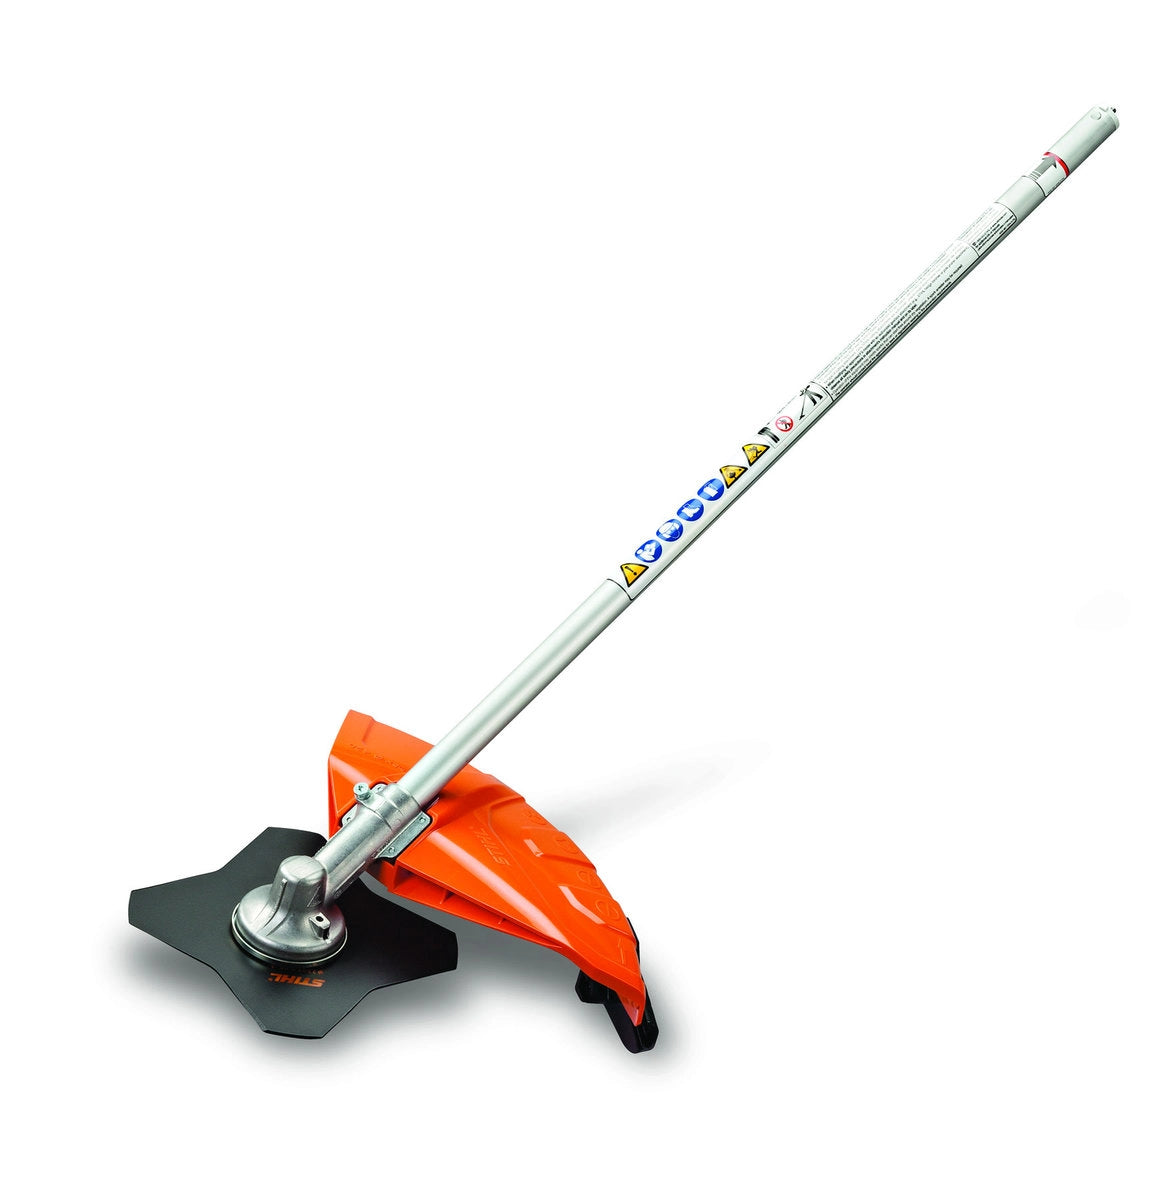 FS-KM Brushcutter with 4 Tooth Grass Blade